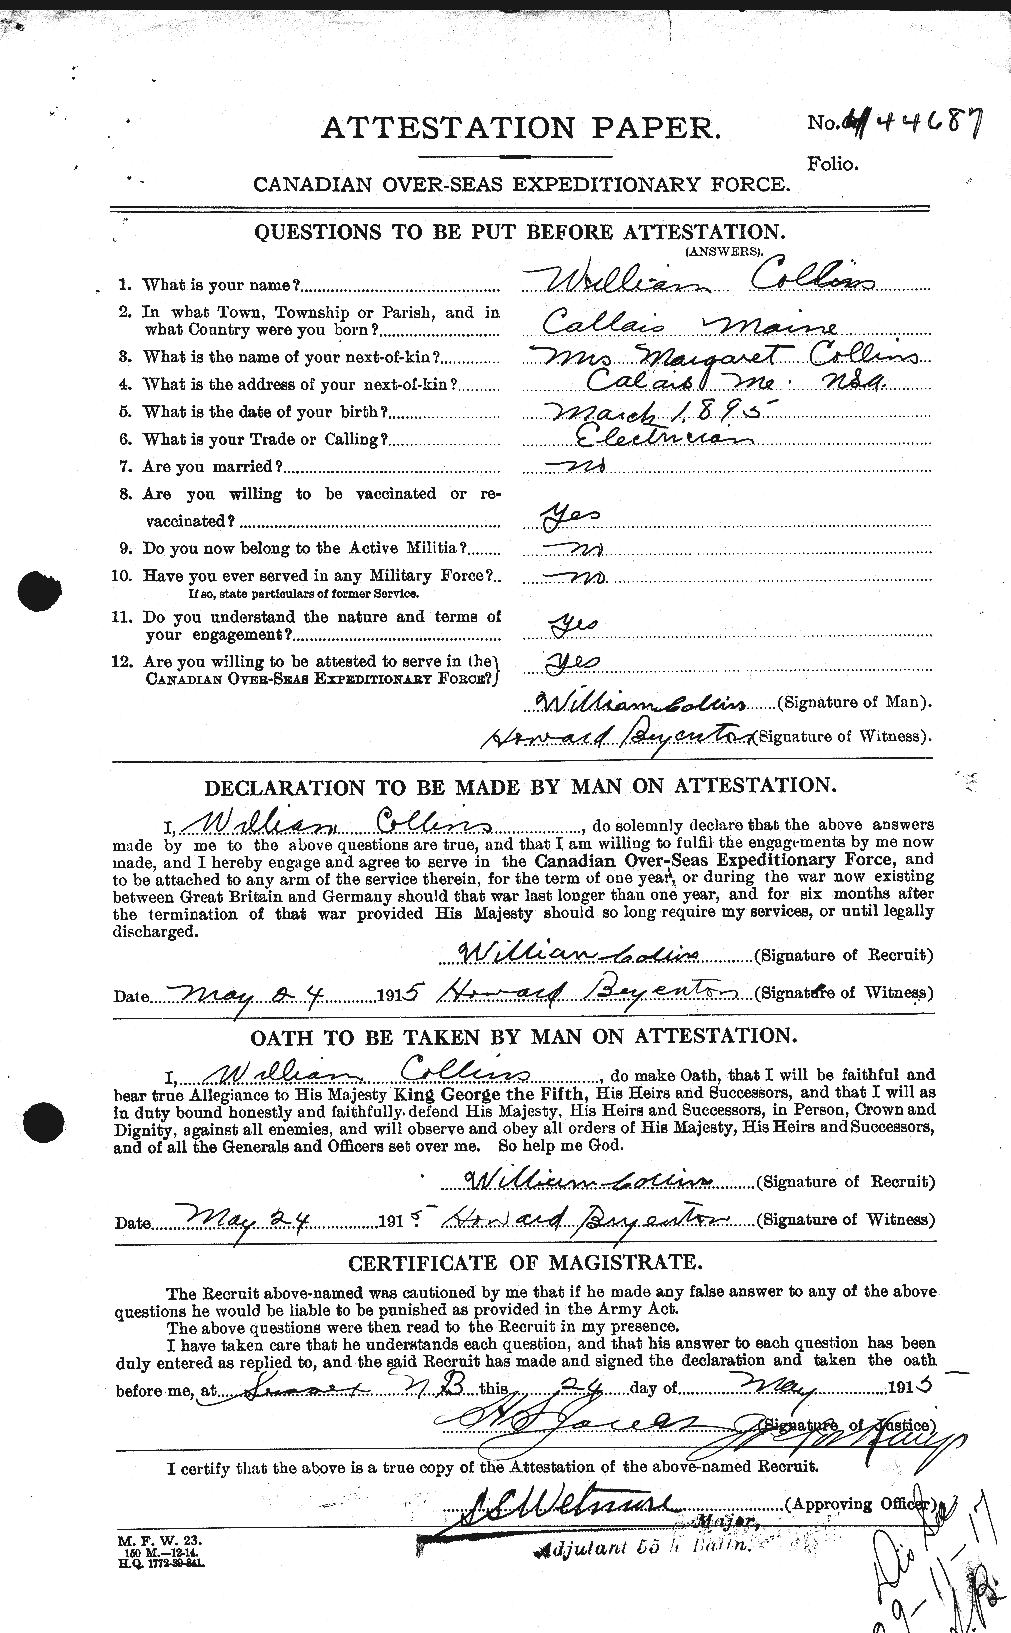 Personnel Records of the First World War - CEF 068815a